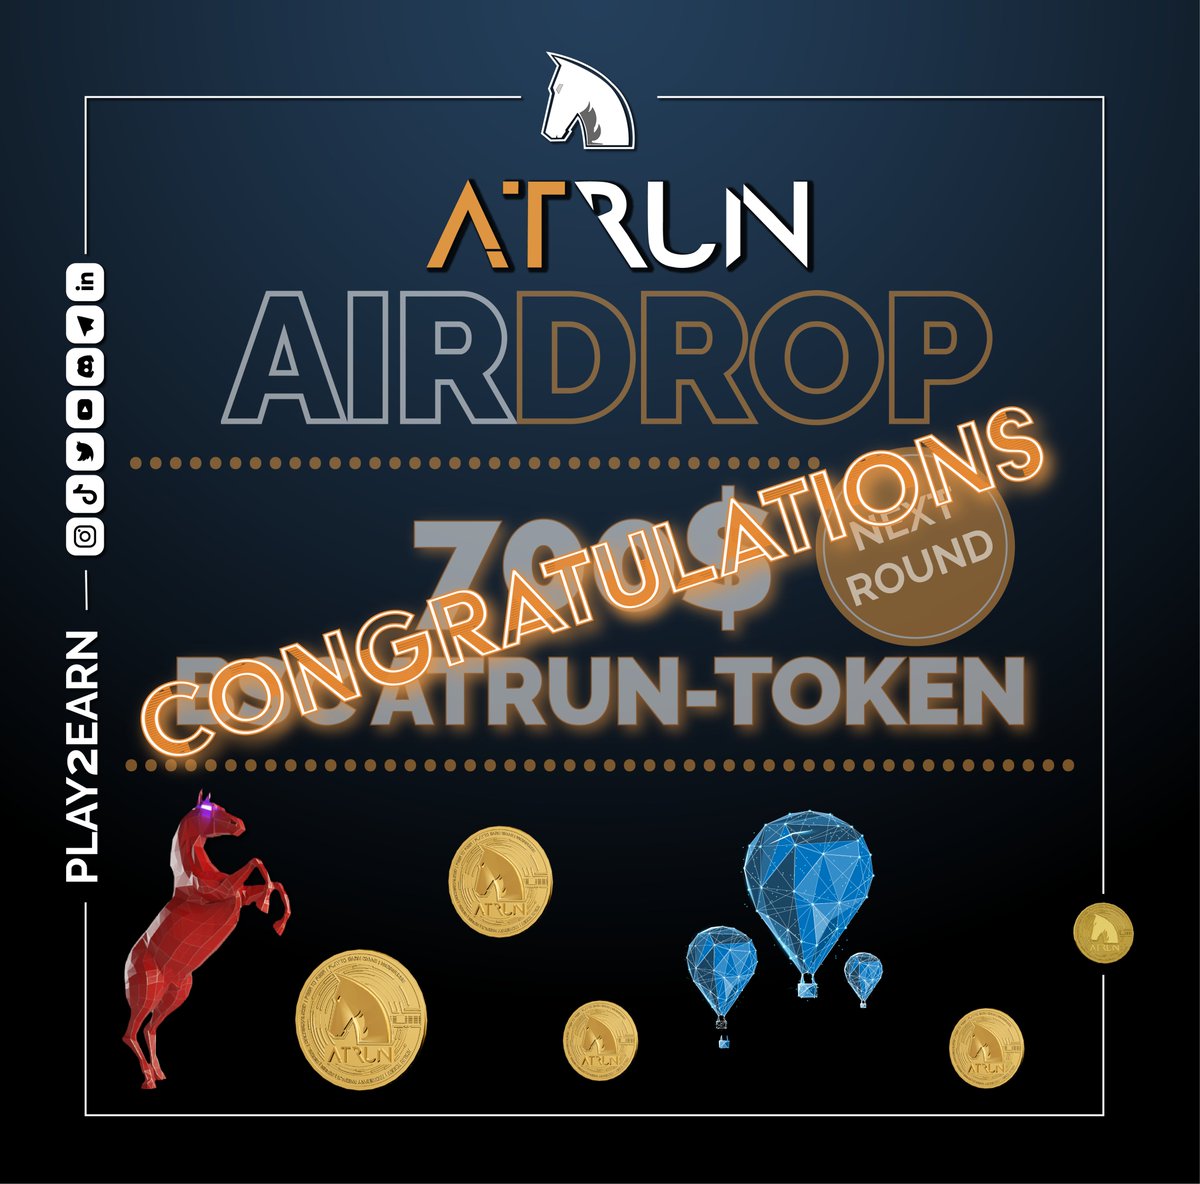 #Airdrop #event #winner #announcement!

#Congratulations to all the lucky #ATRUNers,for the details please check our Telegram group  

#atruntoken #atrun #metaversegeneration #nftgames #nftgamer #NFTCommunity #NFT #Playtoearn #Kazan #Airdrop  #Airdrop 

👉Follow@Atrun_game ♥️+ RT